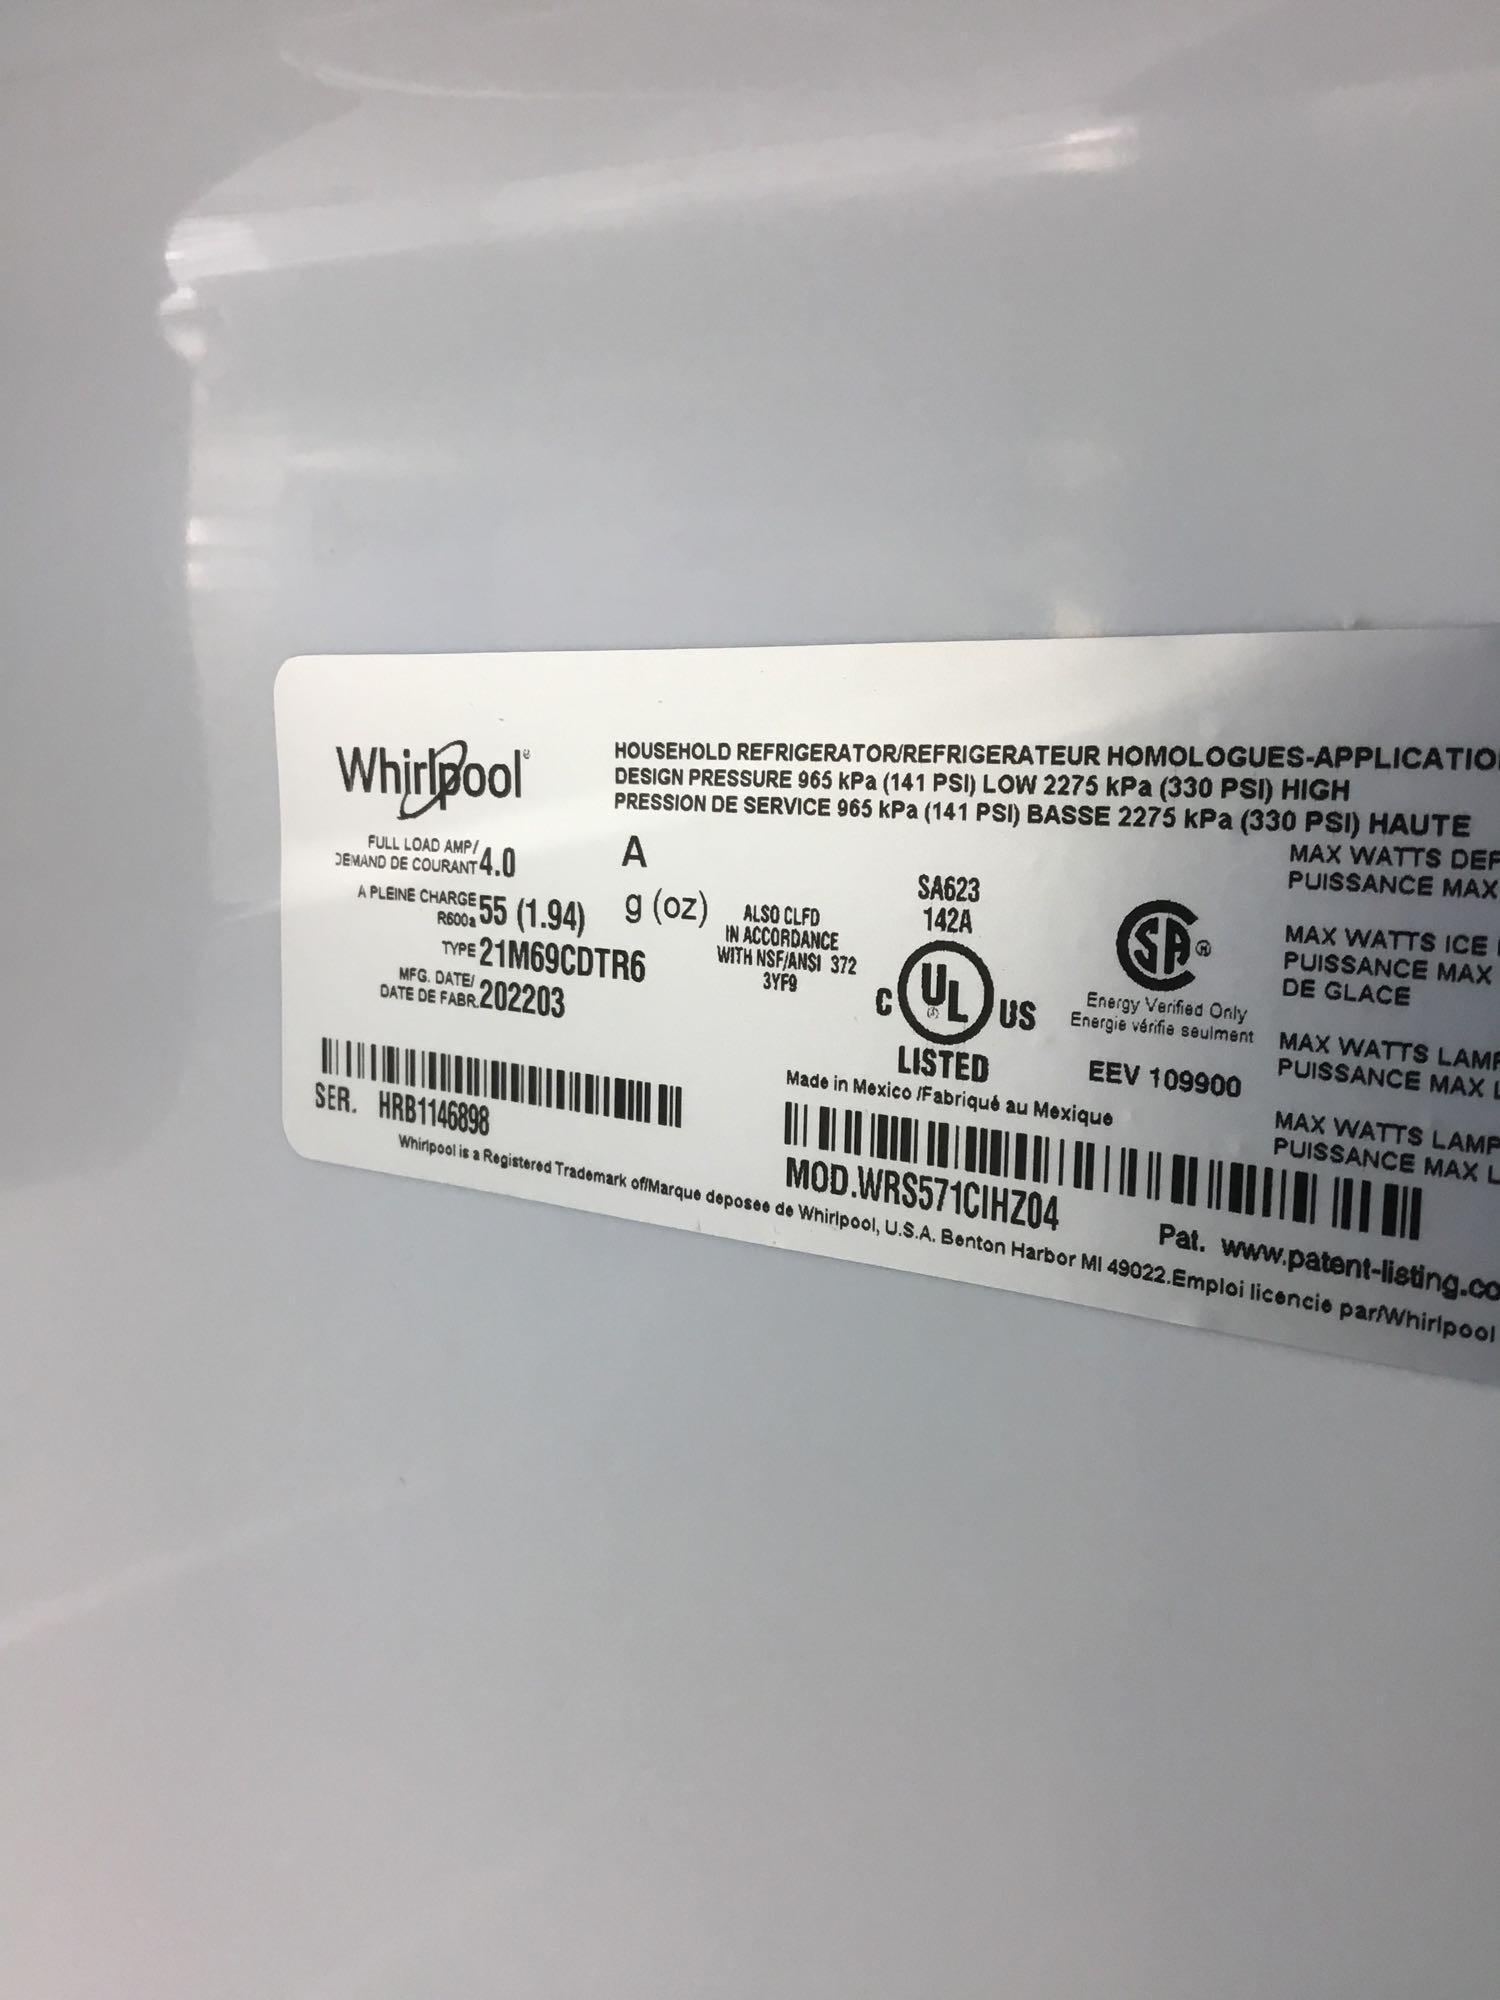 Whirlpool-20.6 Cu. Ft. Side-by-Side Counter-Depth Refrigerator*COLD*